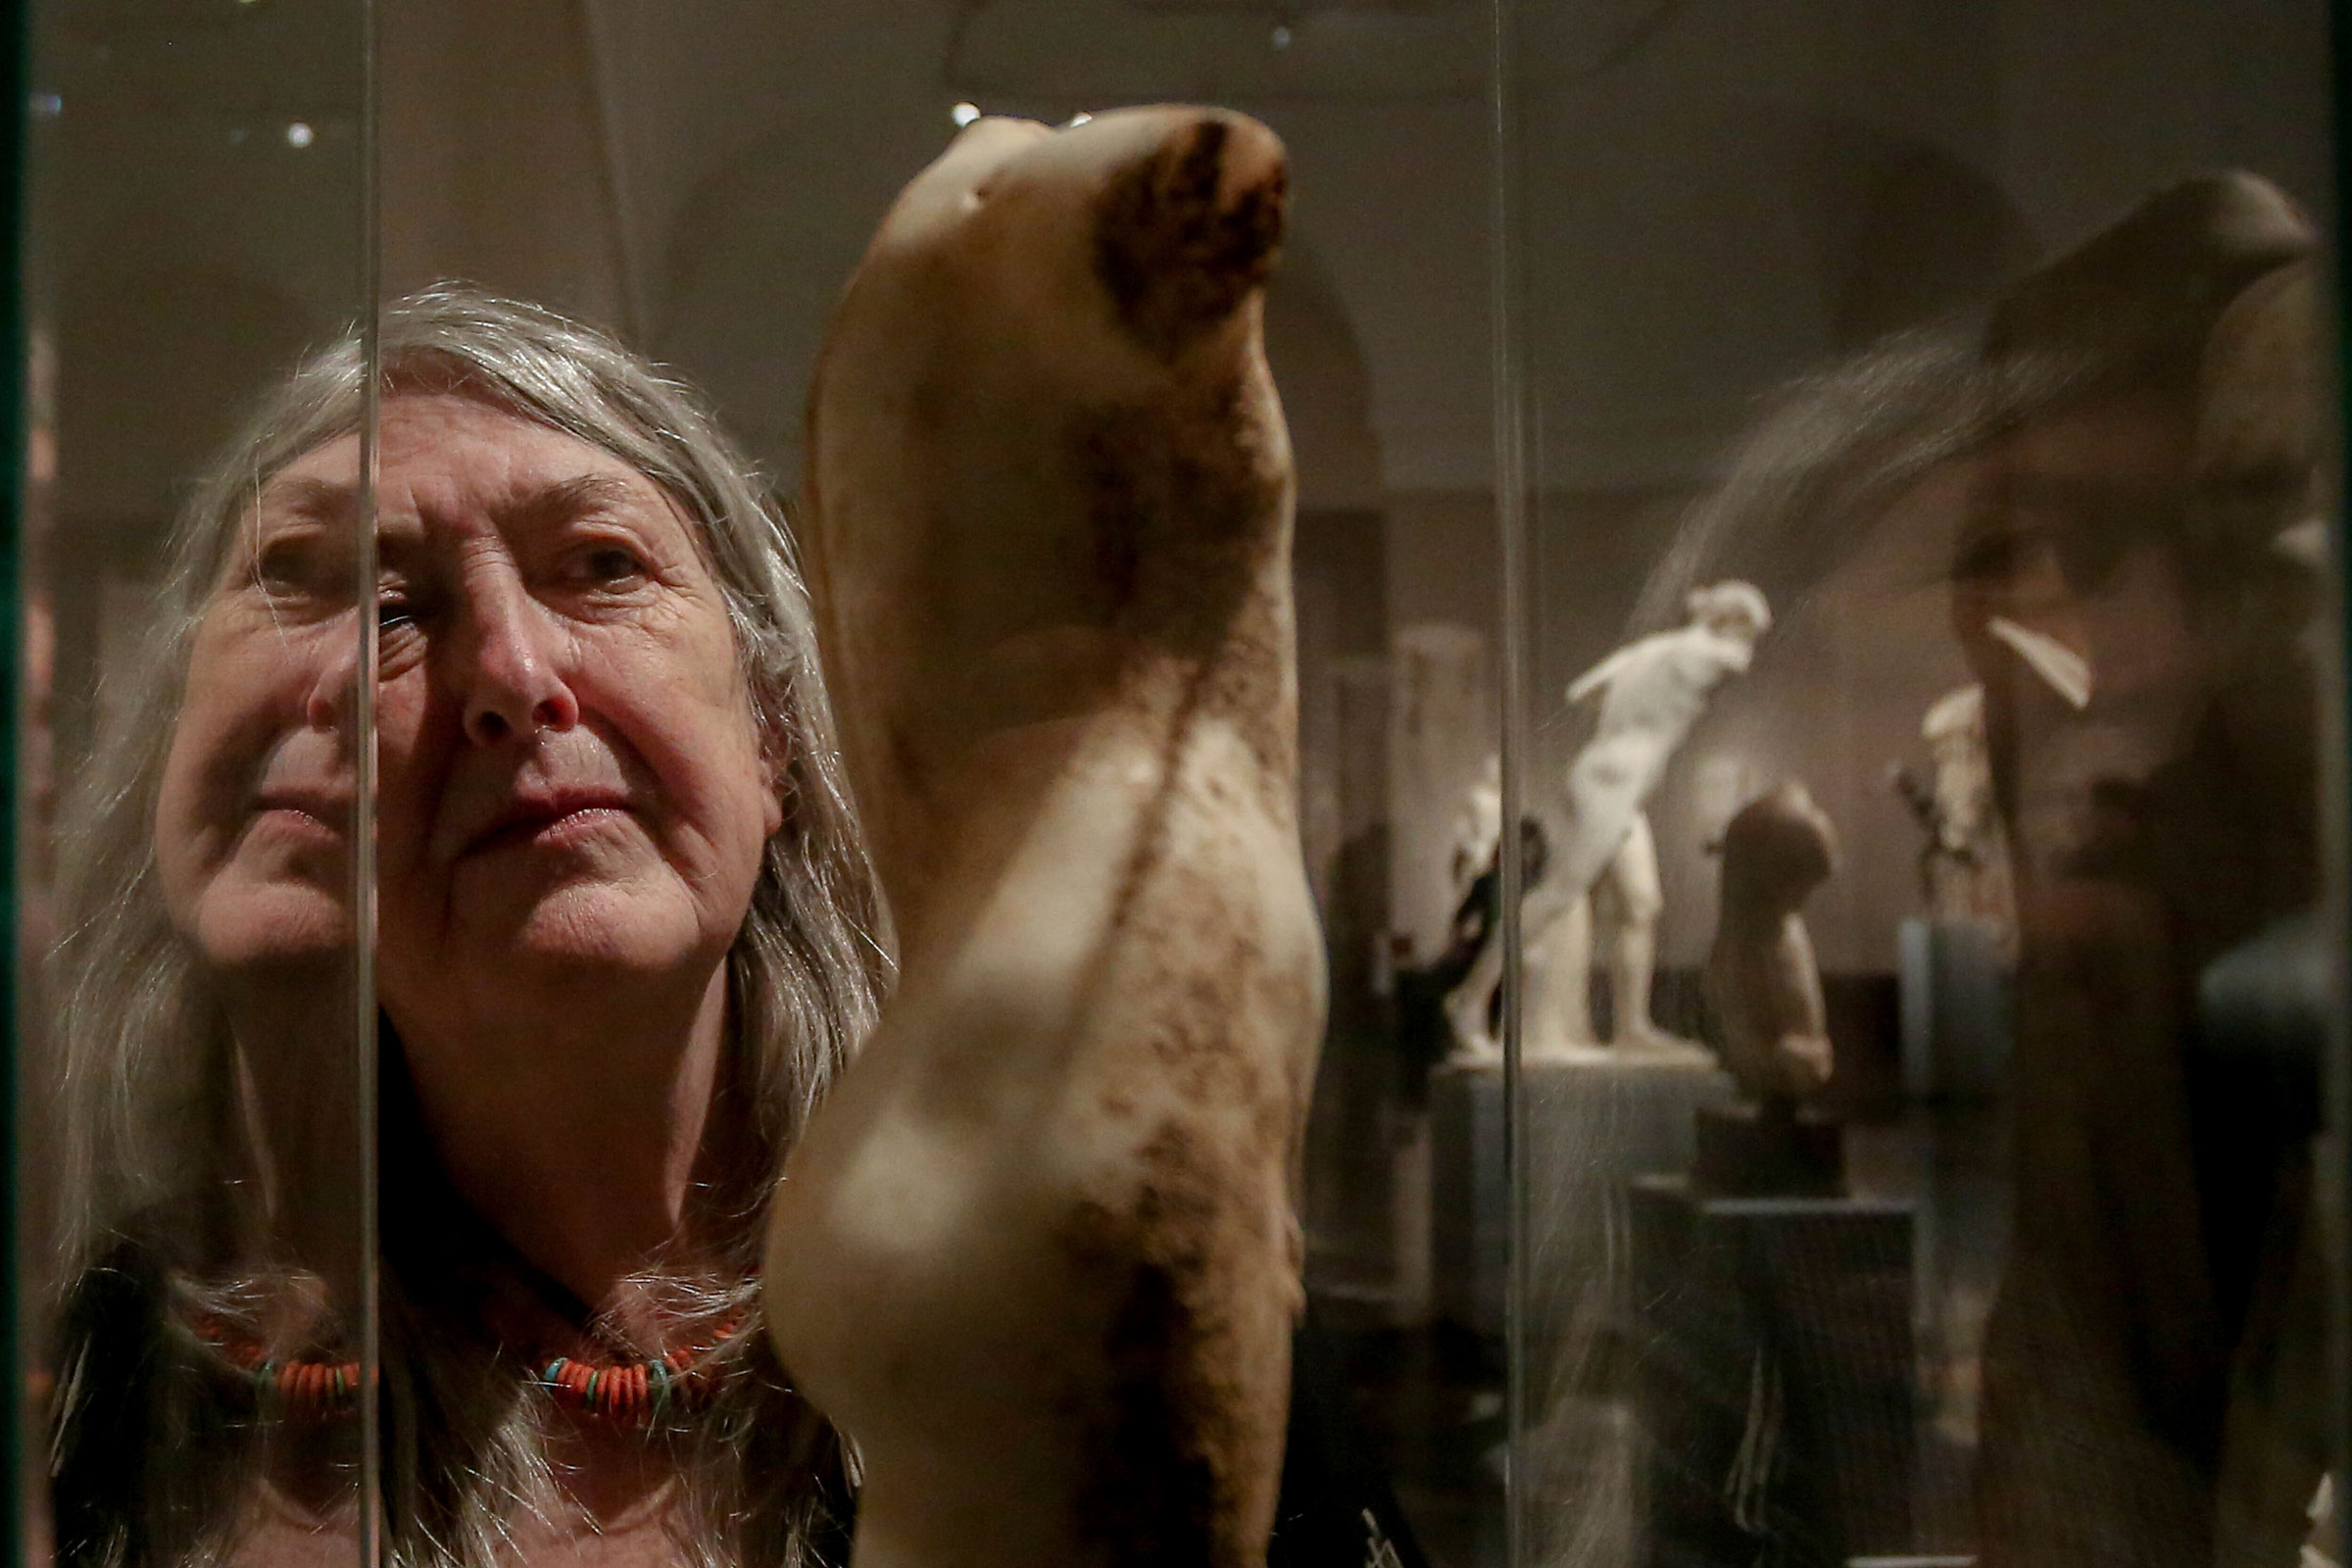 Historian Mary Beard poses during an interview at the Prado Museum